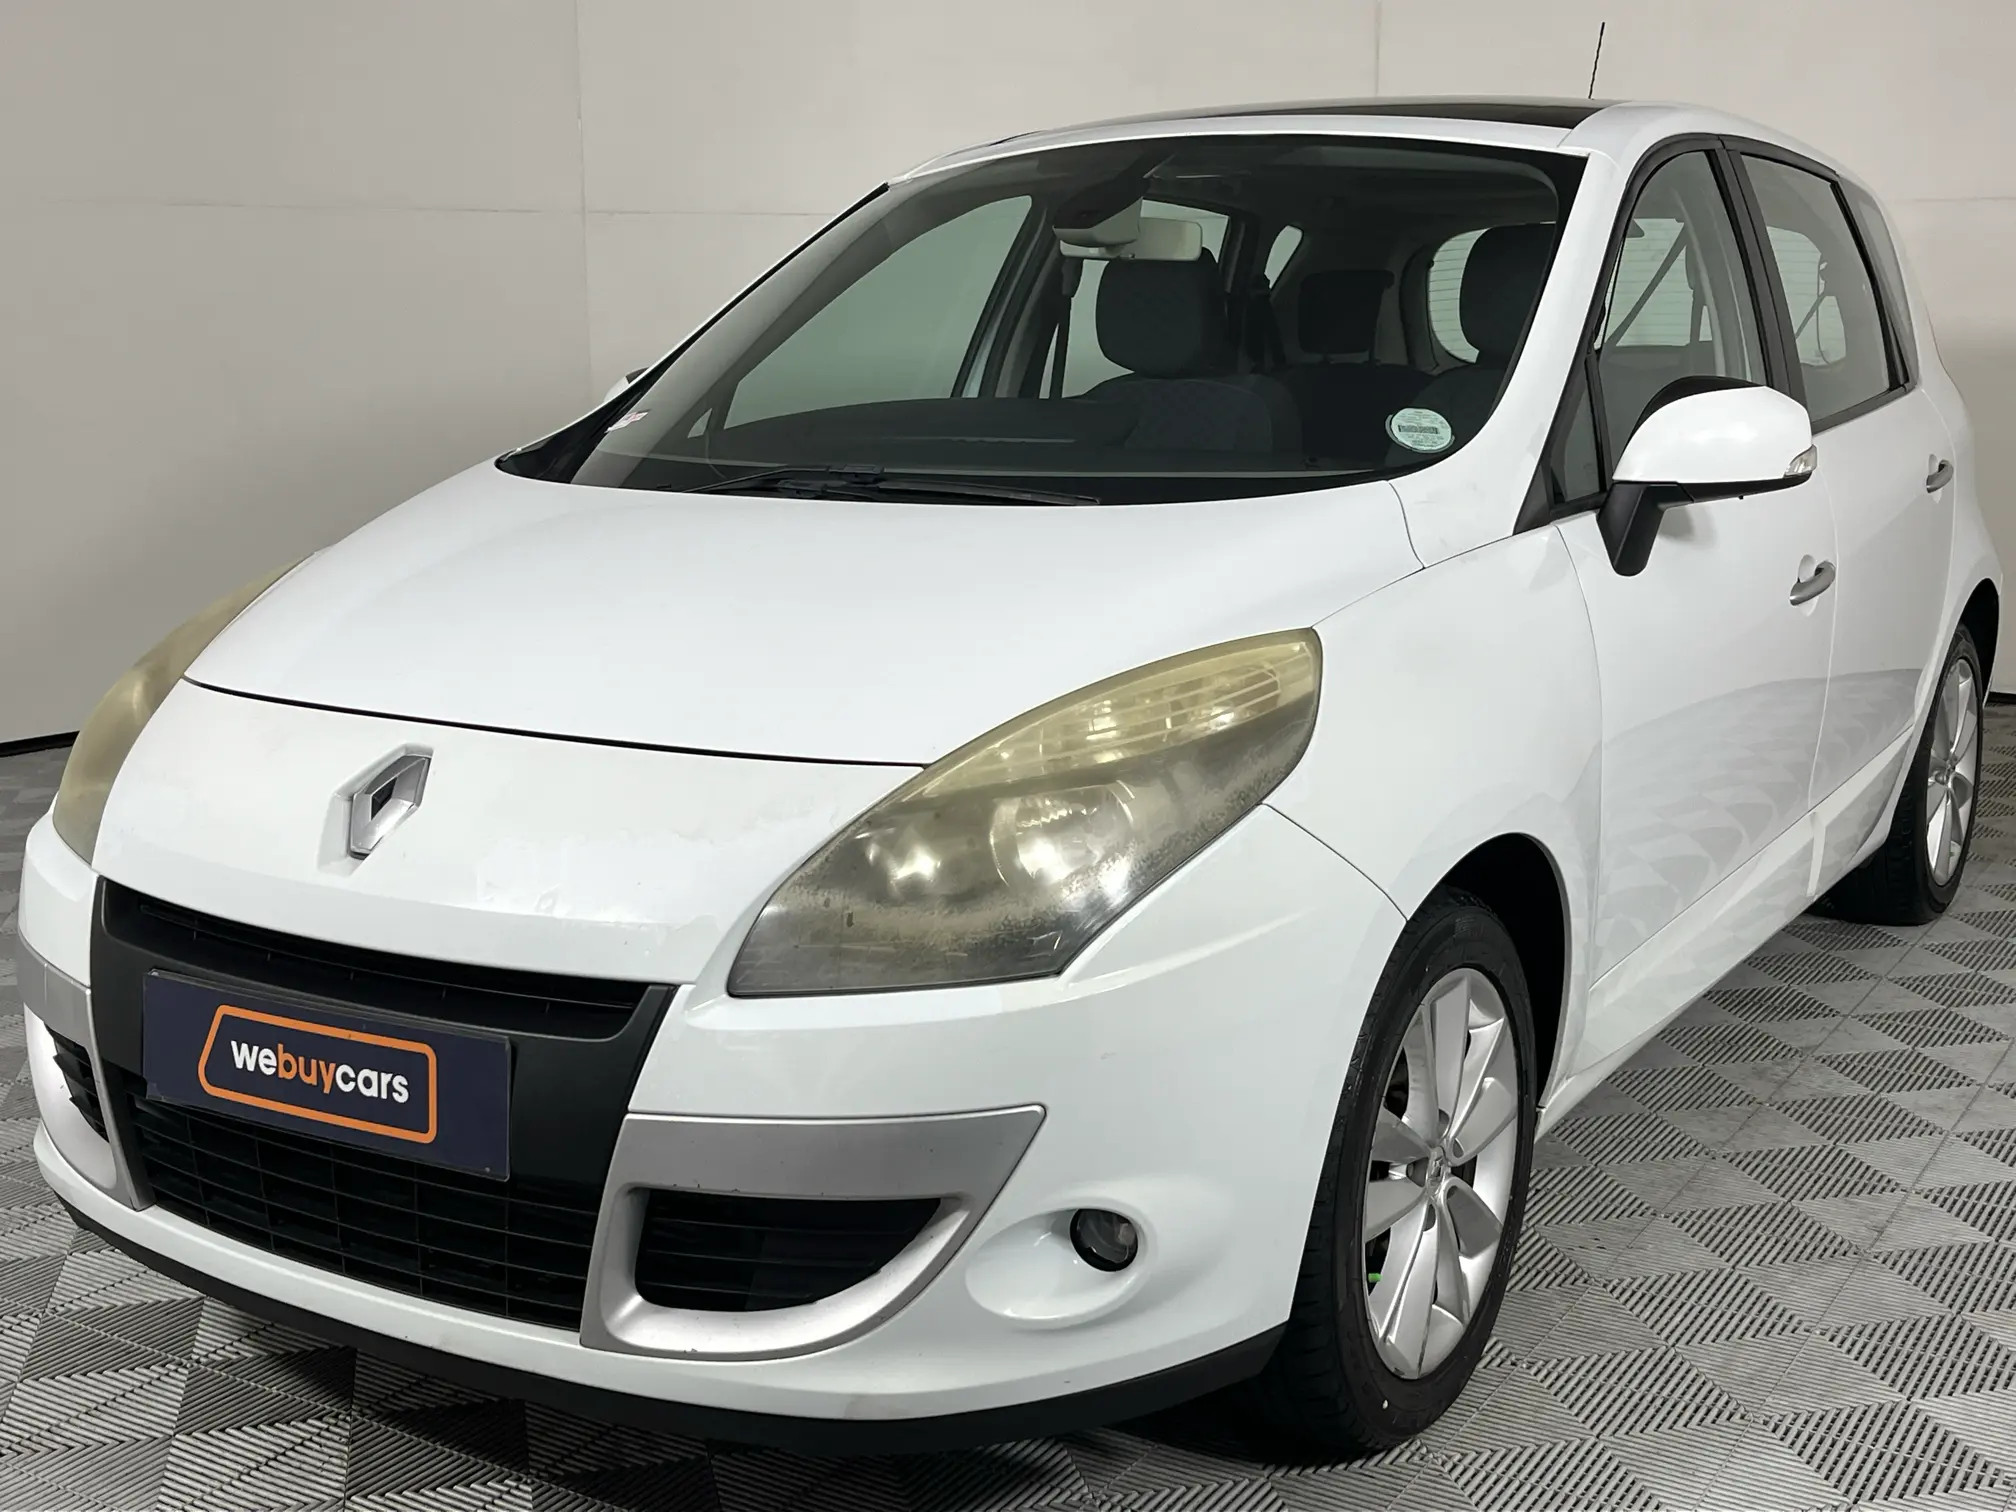 2010 Renault Scenic III 1.9dci Dynamique